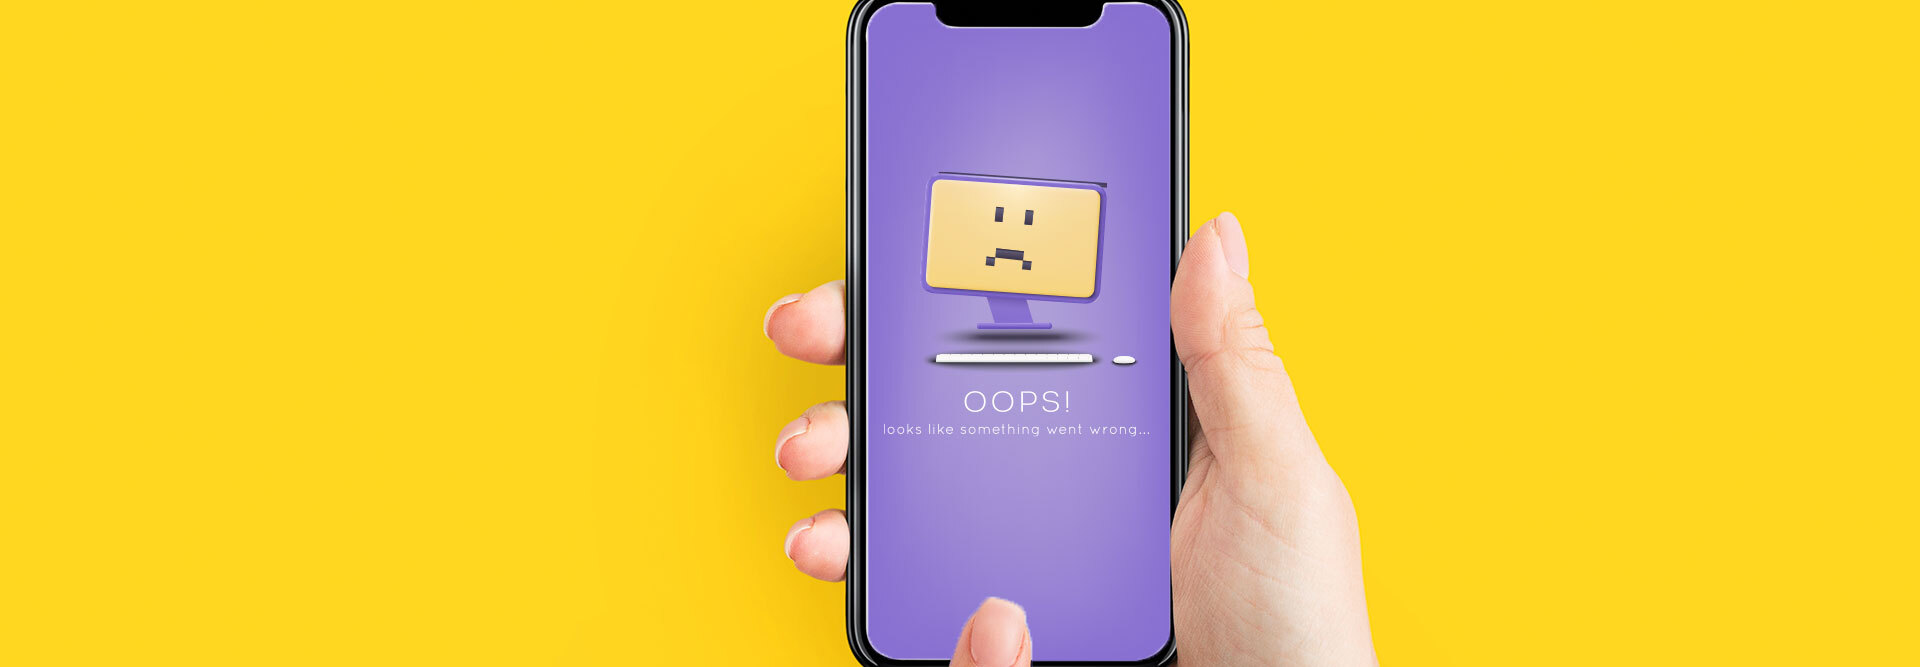 A hand holding an iPhone against a yellow background. The phone screen is showing an empty state error page that follows UX best practices.